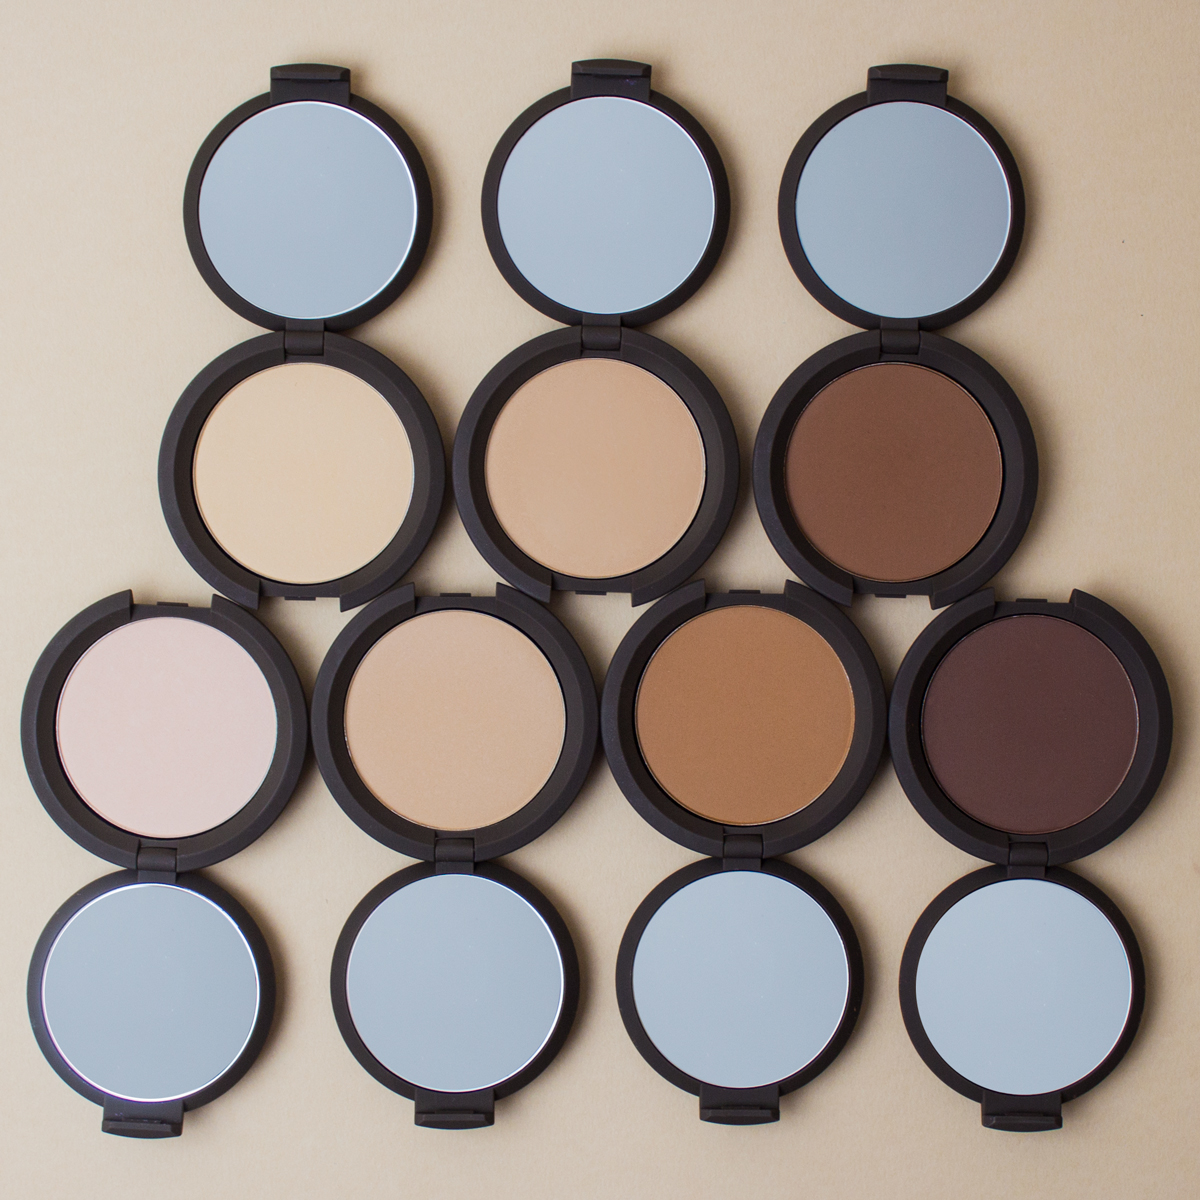 Becca Cosmetics has been described as showing ‘commitment to developing premium, luxurious products in a balanced range of wearable shades for all skin tones’ 